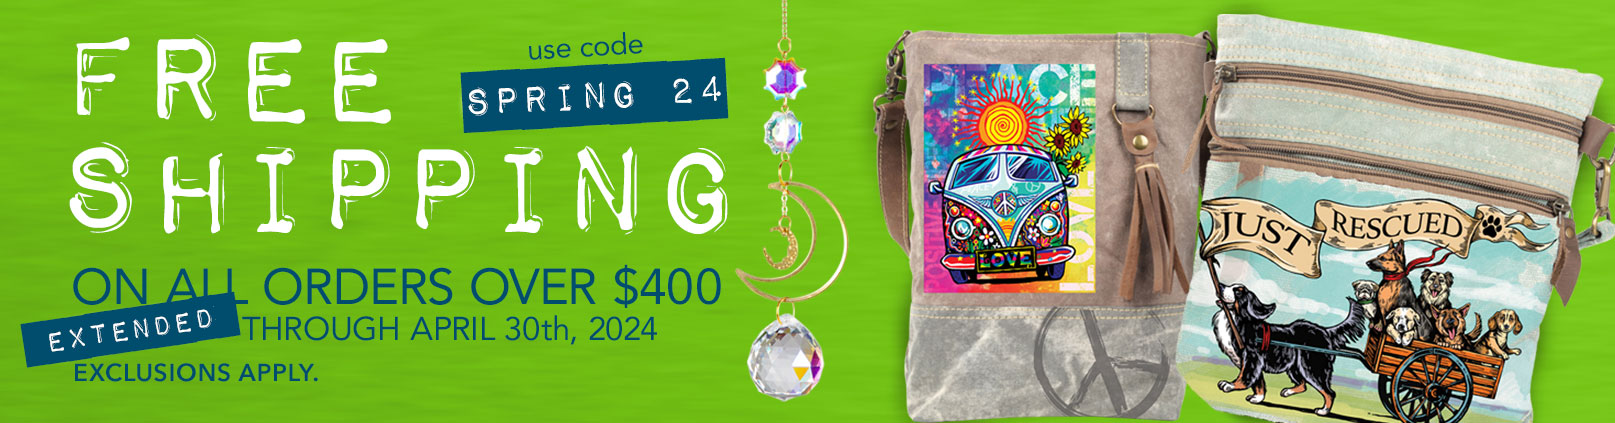 2024-MAR-APR-FREE-SHIPPING-EXTENDED-BANNER